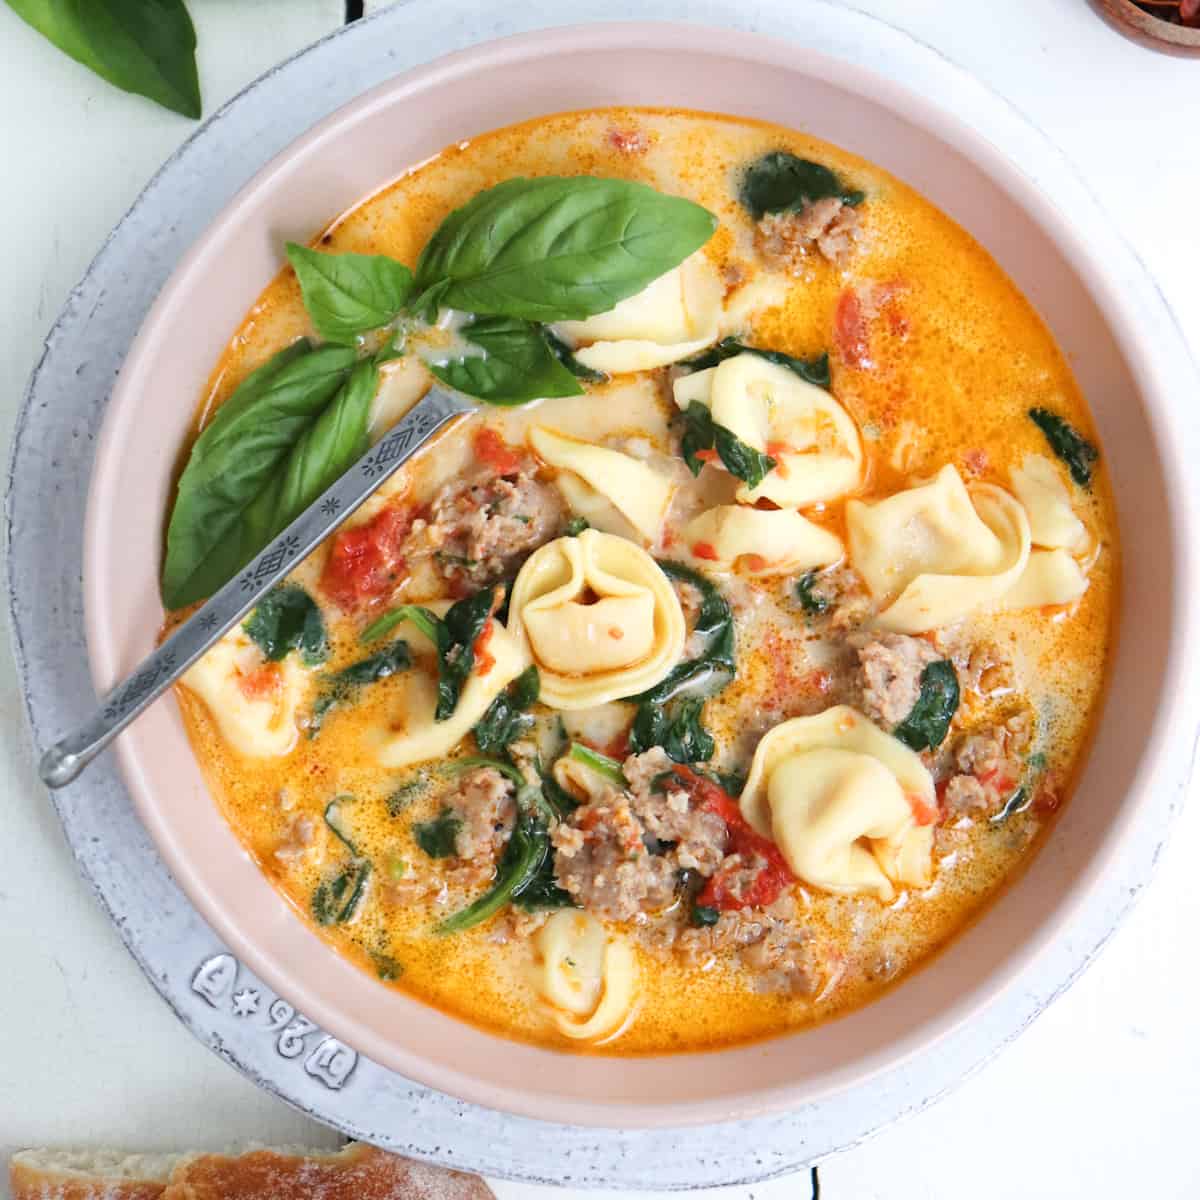 bowl of tortellini soup garnished with basil.